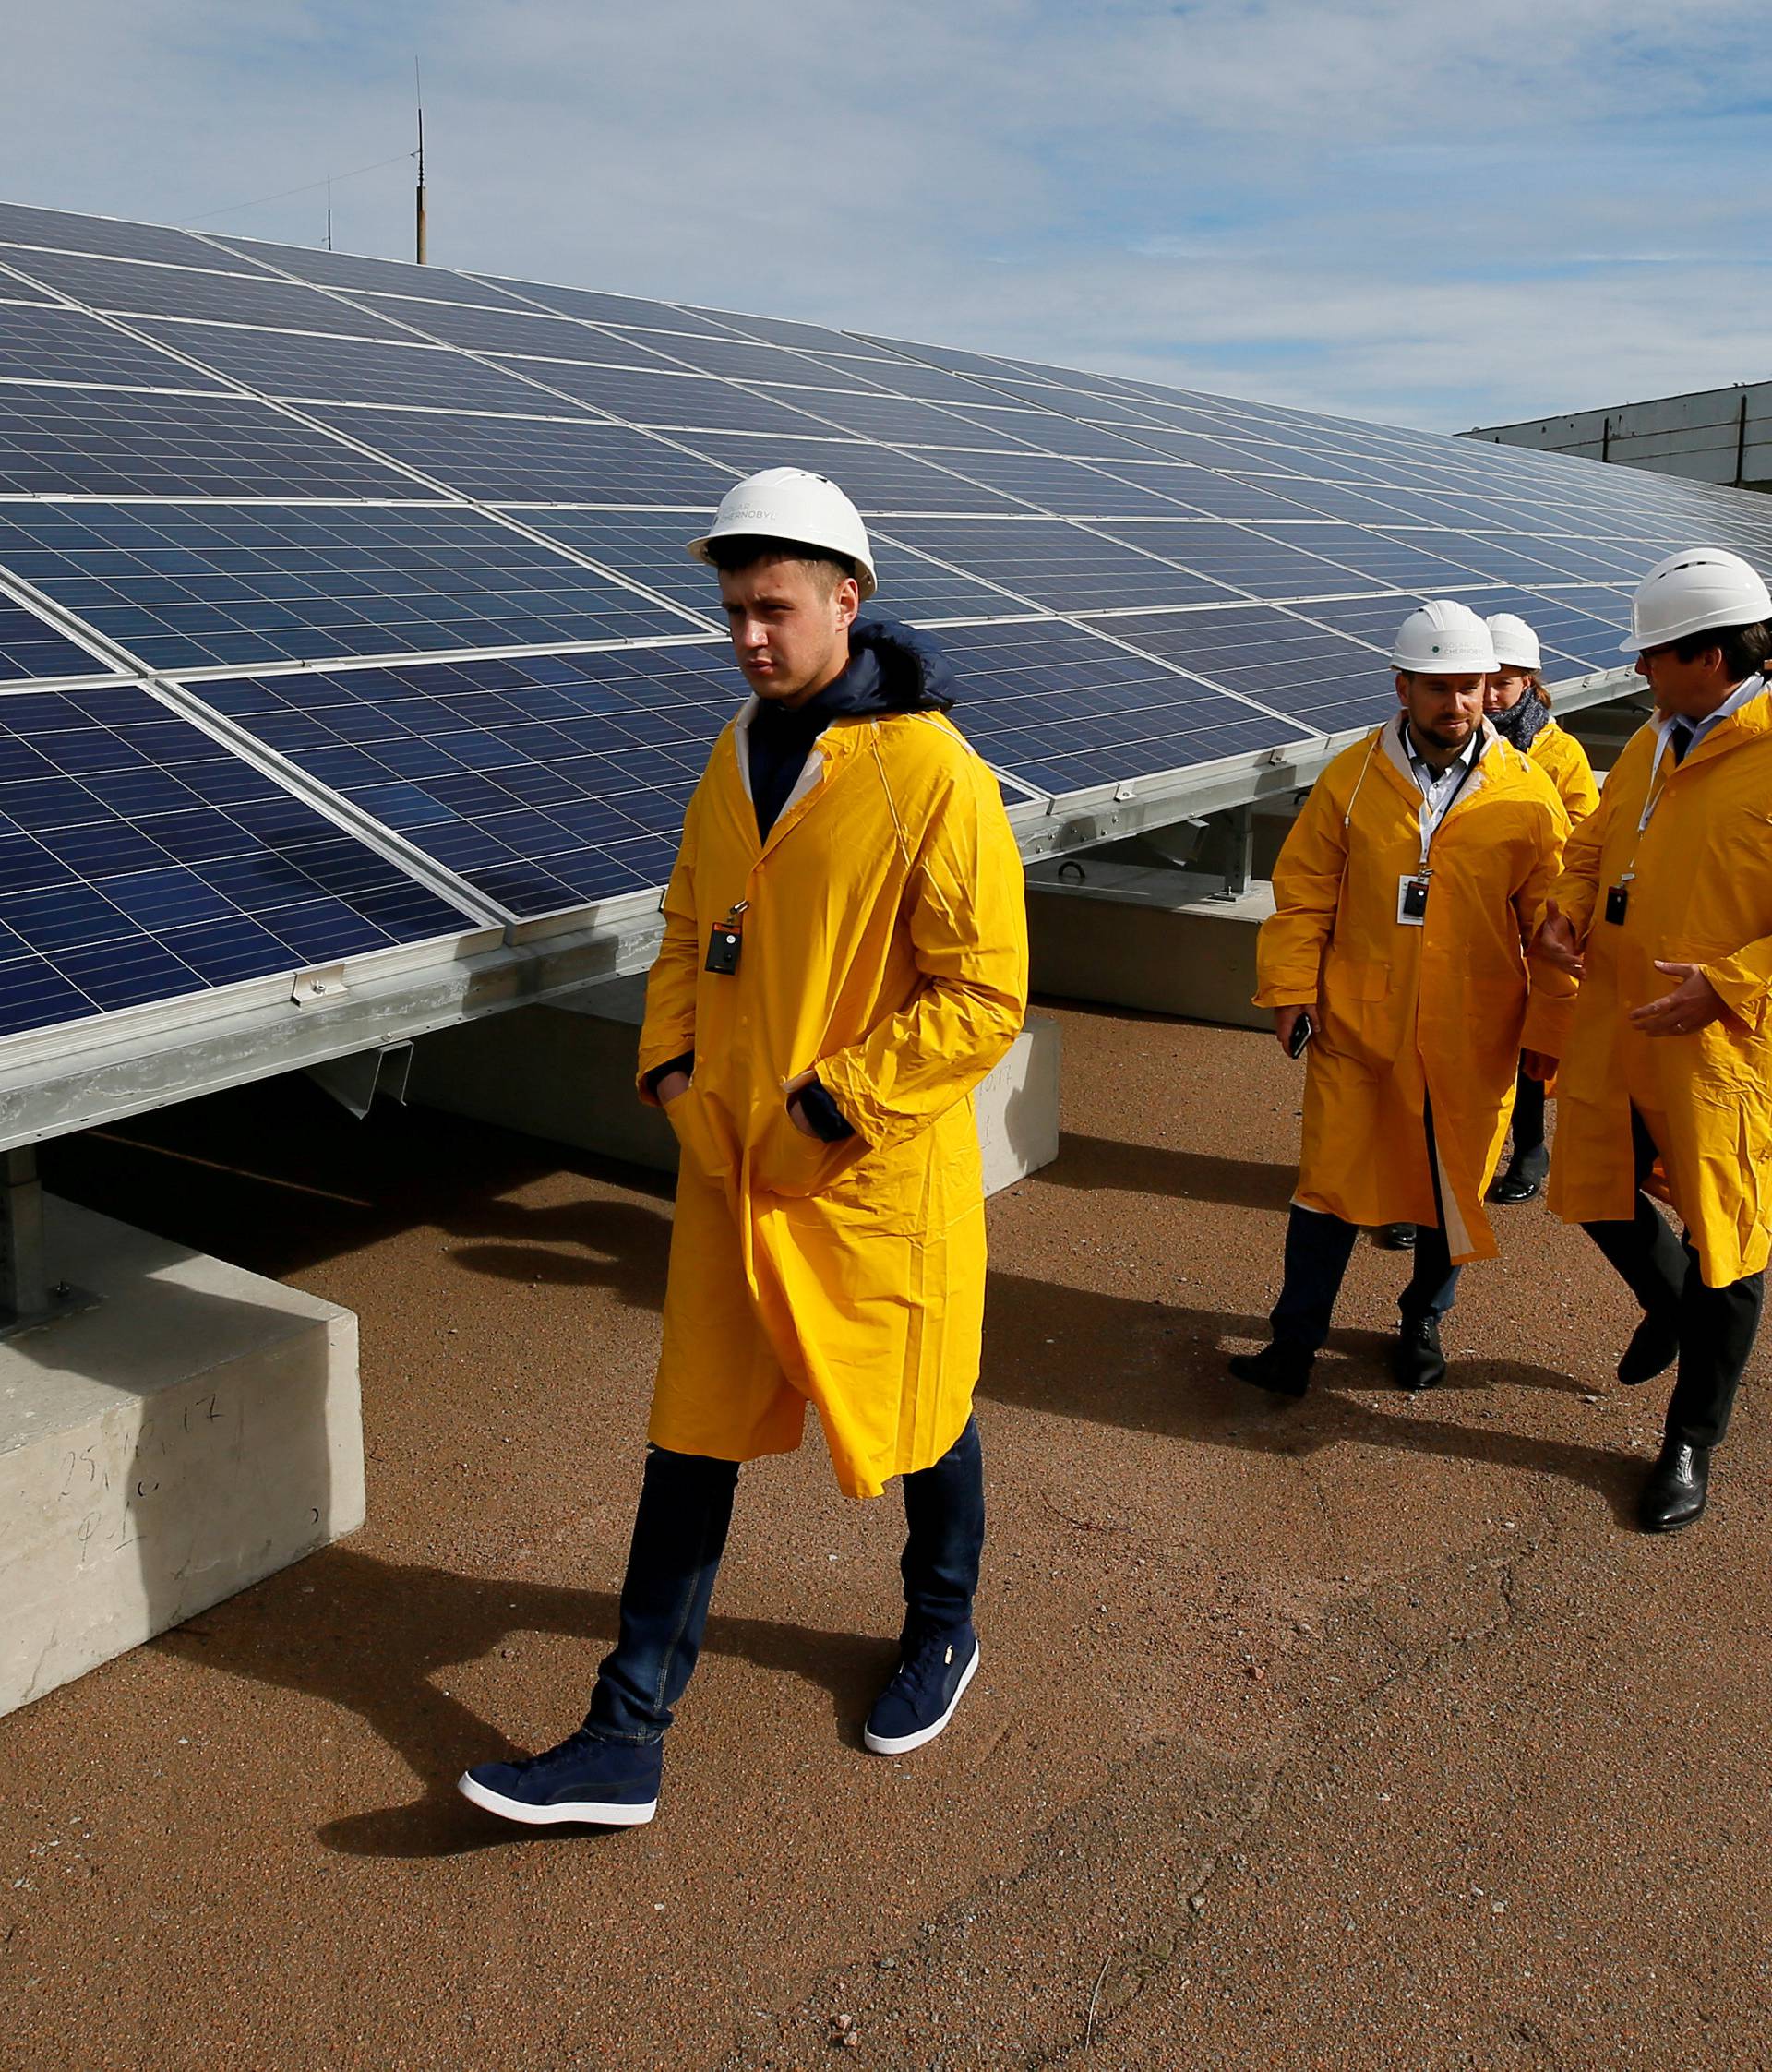 Visitors walk past solar panels at a solar power plant built on the site of the world's worst nuclear disaster, Chernobyl